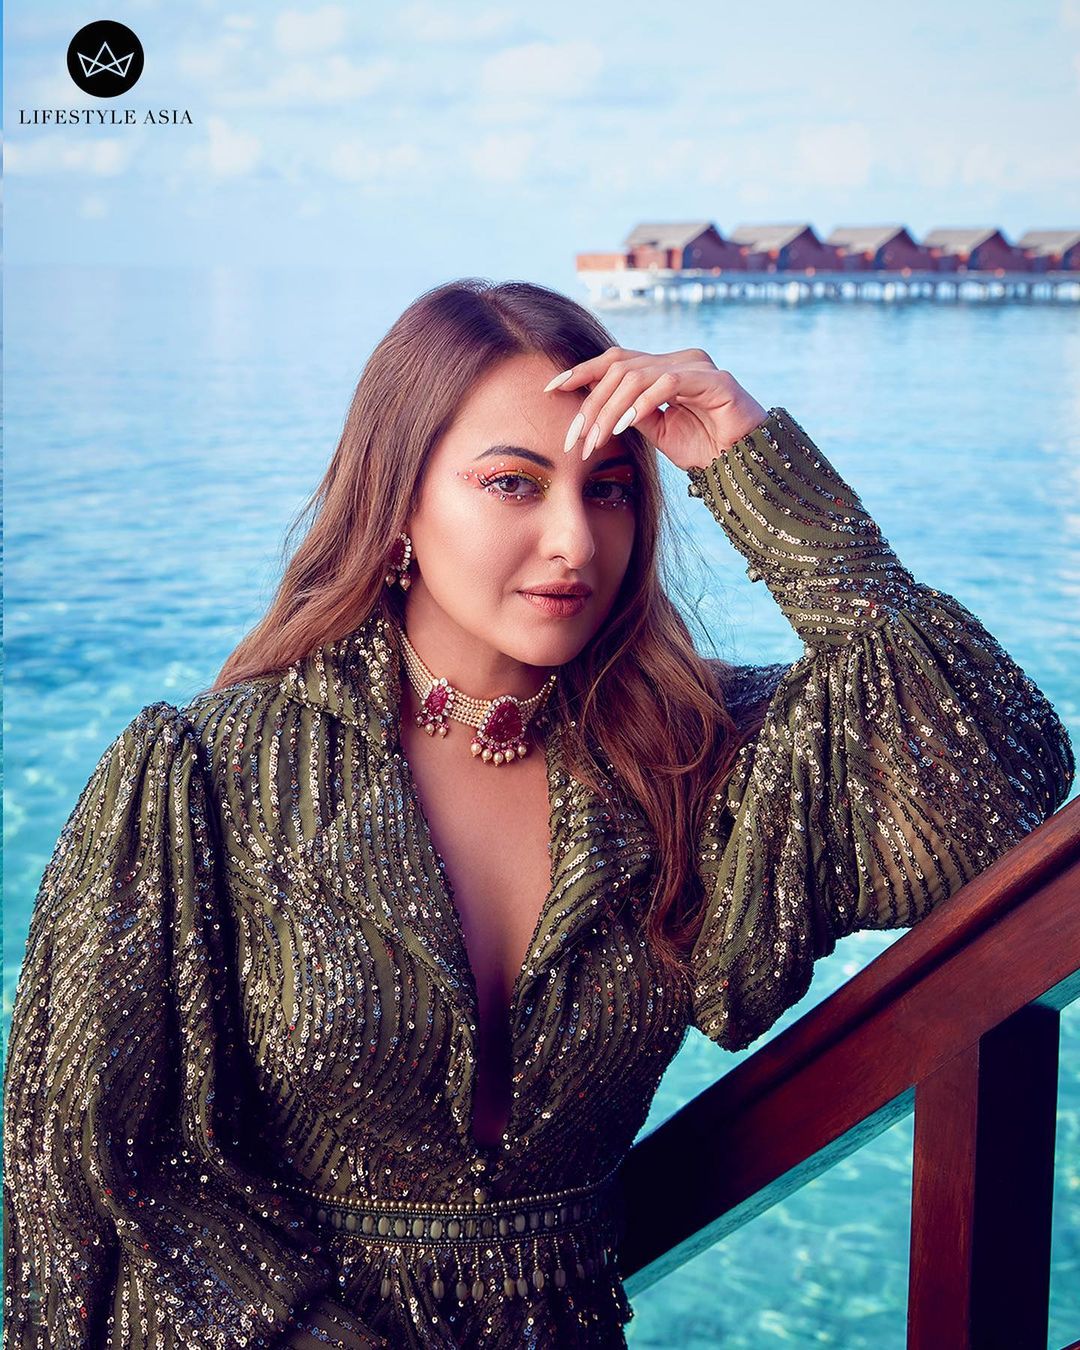 Sonakshi Sinha stuns as cover girl for Lifestyle Asia. The photoshoot took place in Maldives